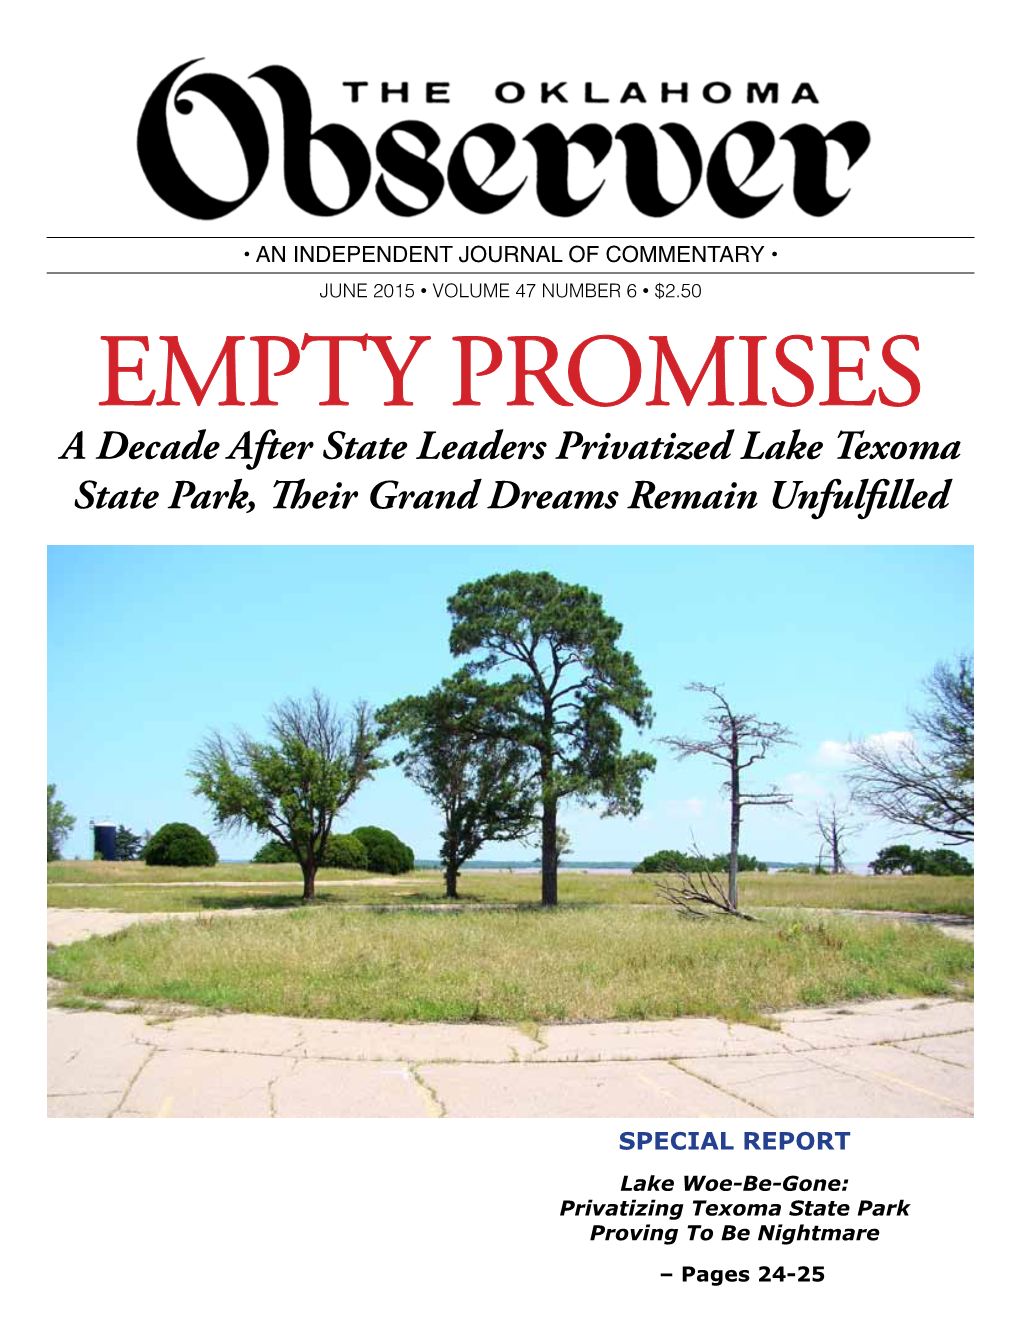 EMPTY PROMISES a Decade After State Leaders Privatized Lake Texoma State Park, Their Grand Dreams Remain Unfulfilled